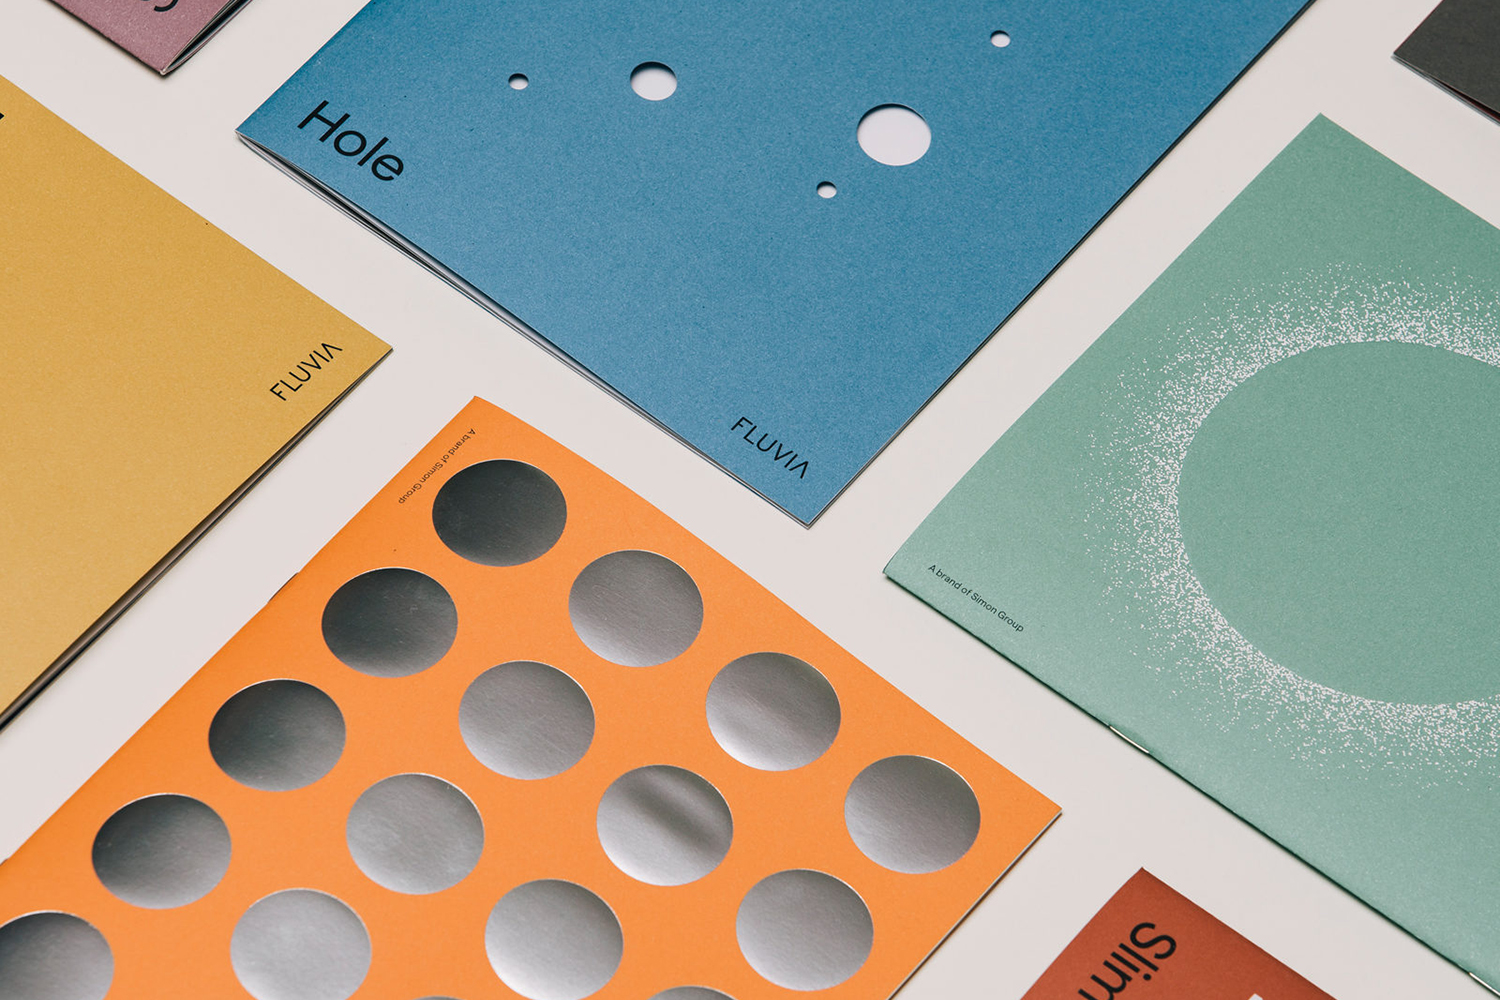 Visual identity and brochure covers by Spanish studio Folch for Fluvia, a range of adaptable lighting solutions from LED Simon